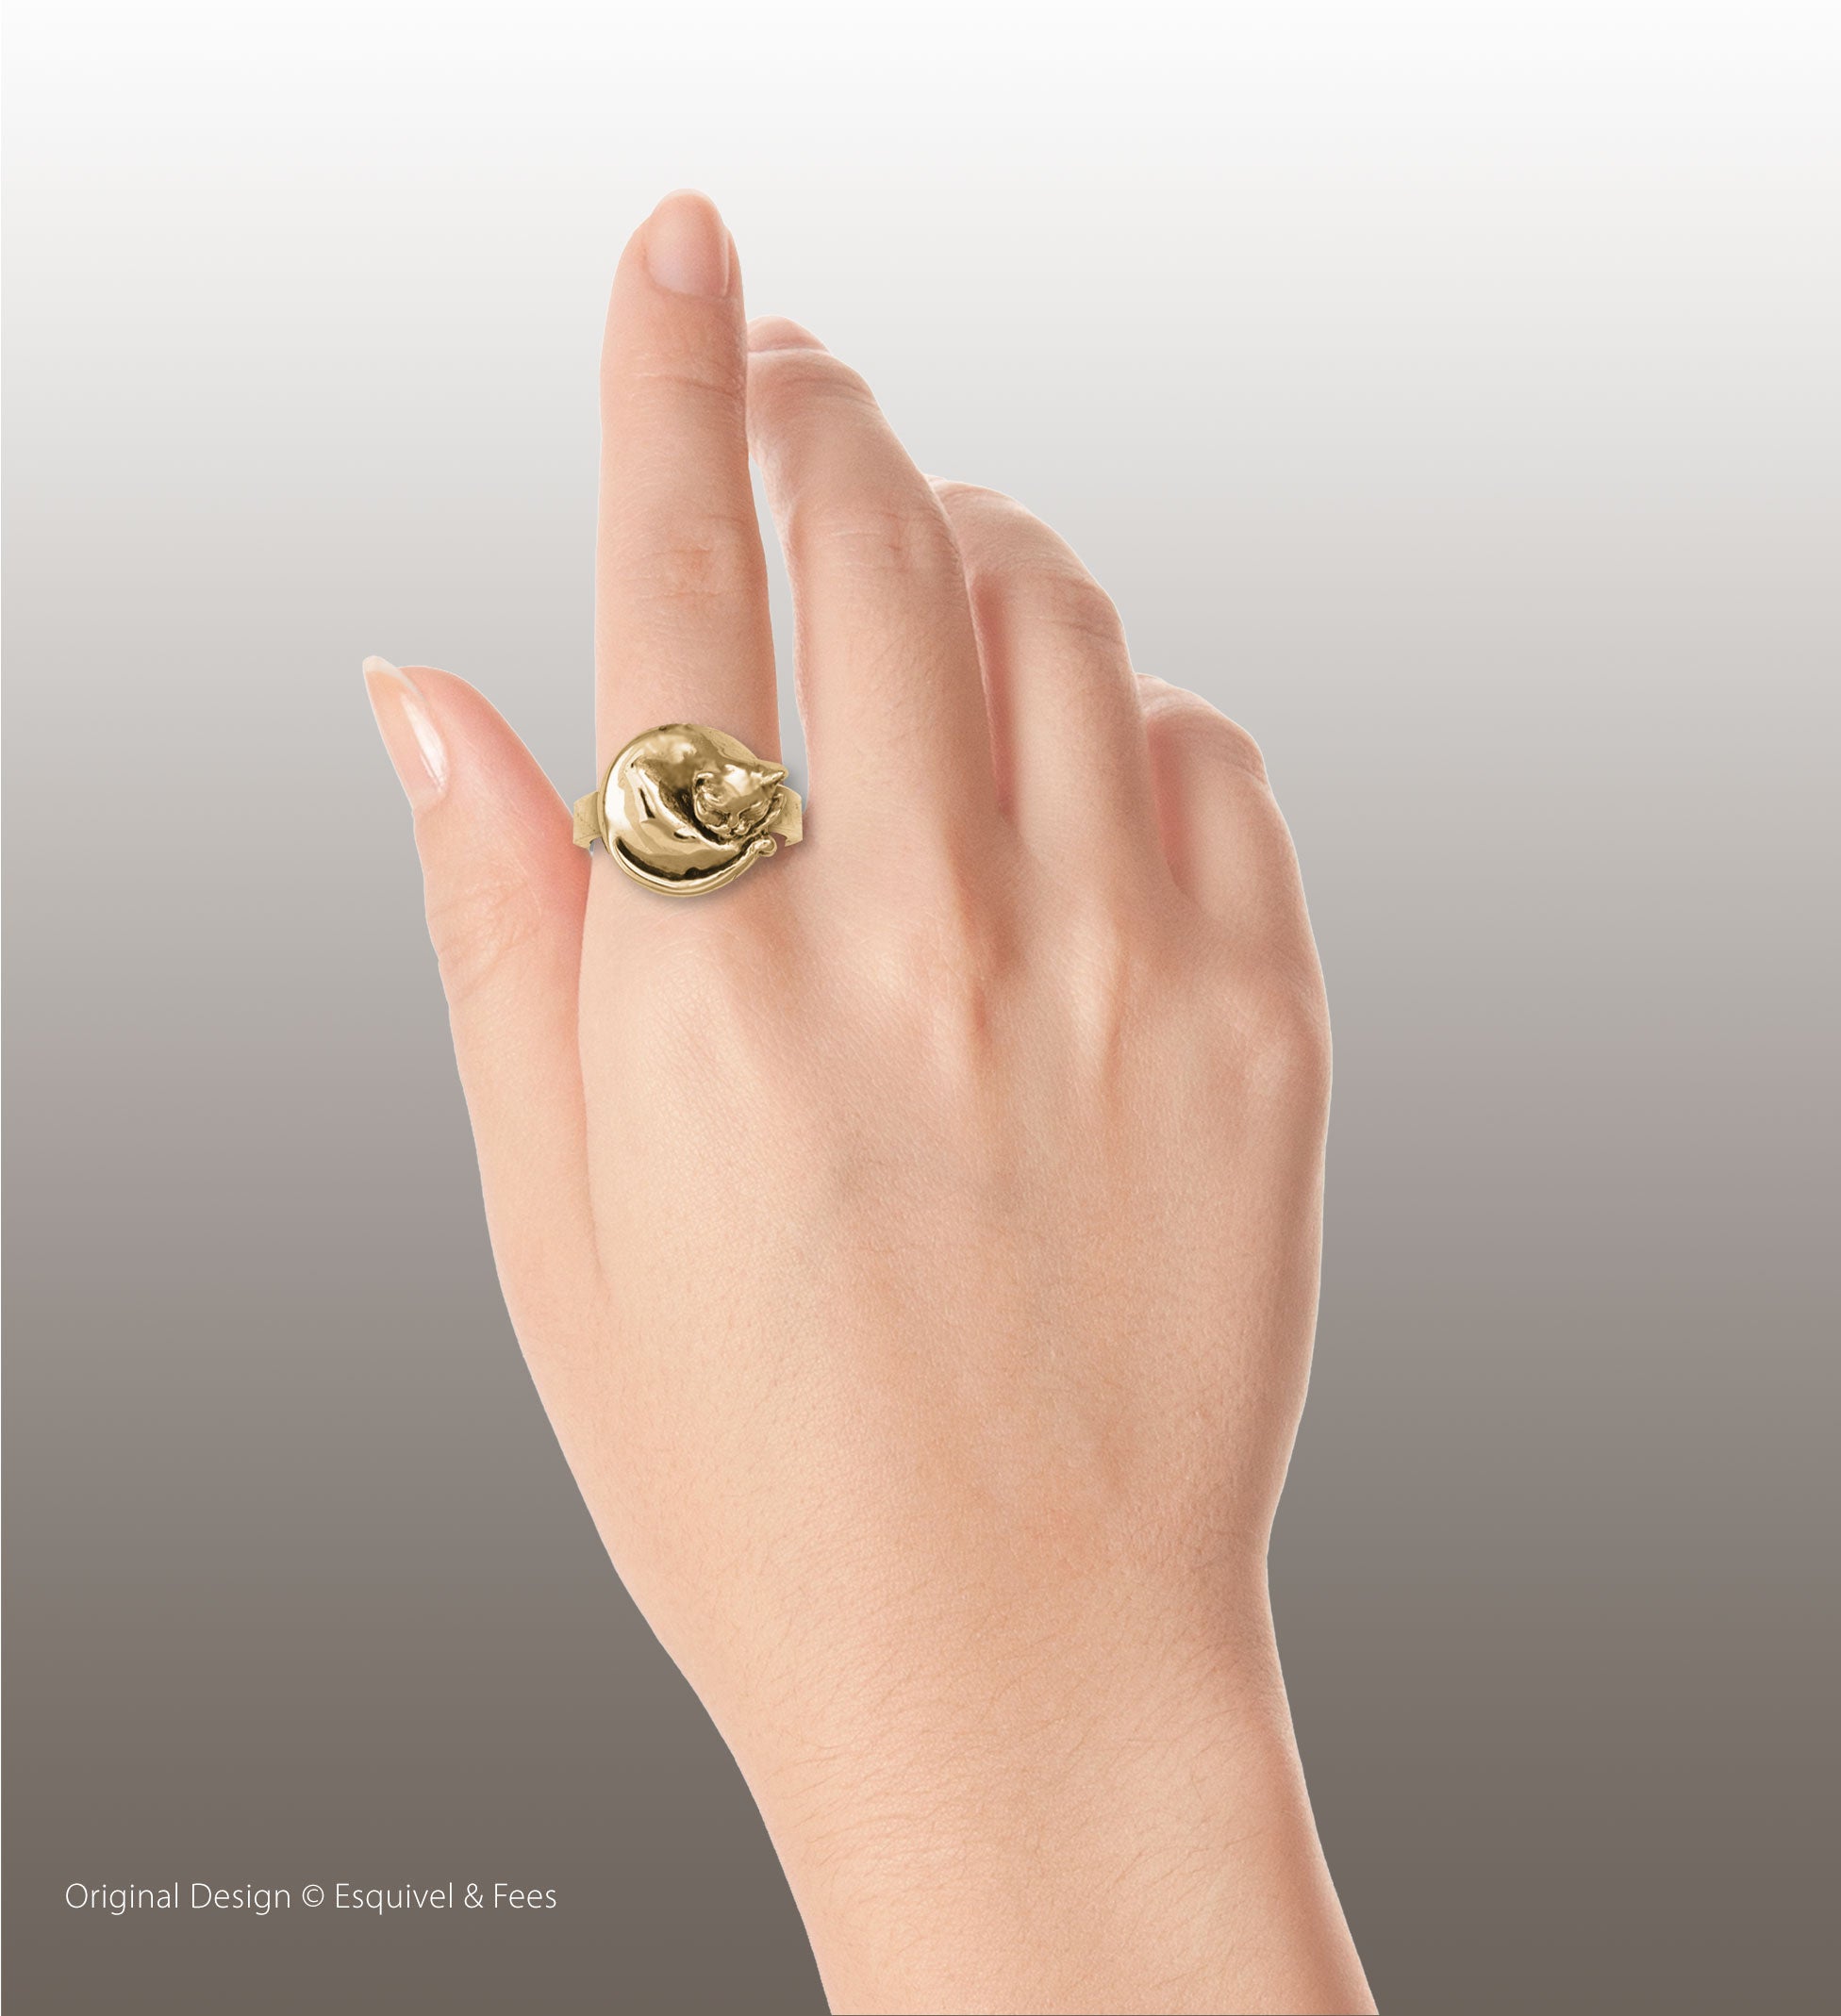 Handmade Gothic Chain Simple Gold Ring For Men And Women Delicate Stainless  Steel, Twisted, Creative Finger Jewelry Gift From Tindall, $8.05 |  DHgate.Com